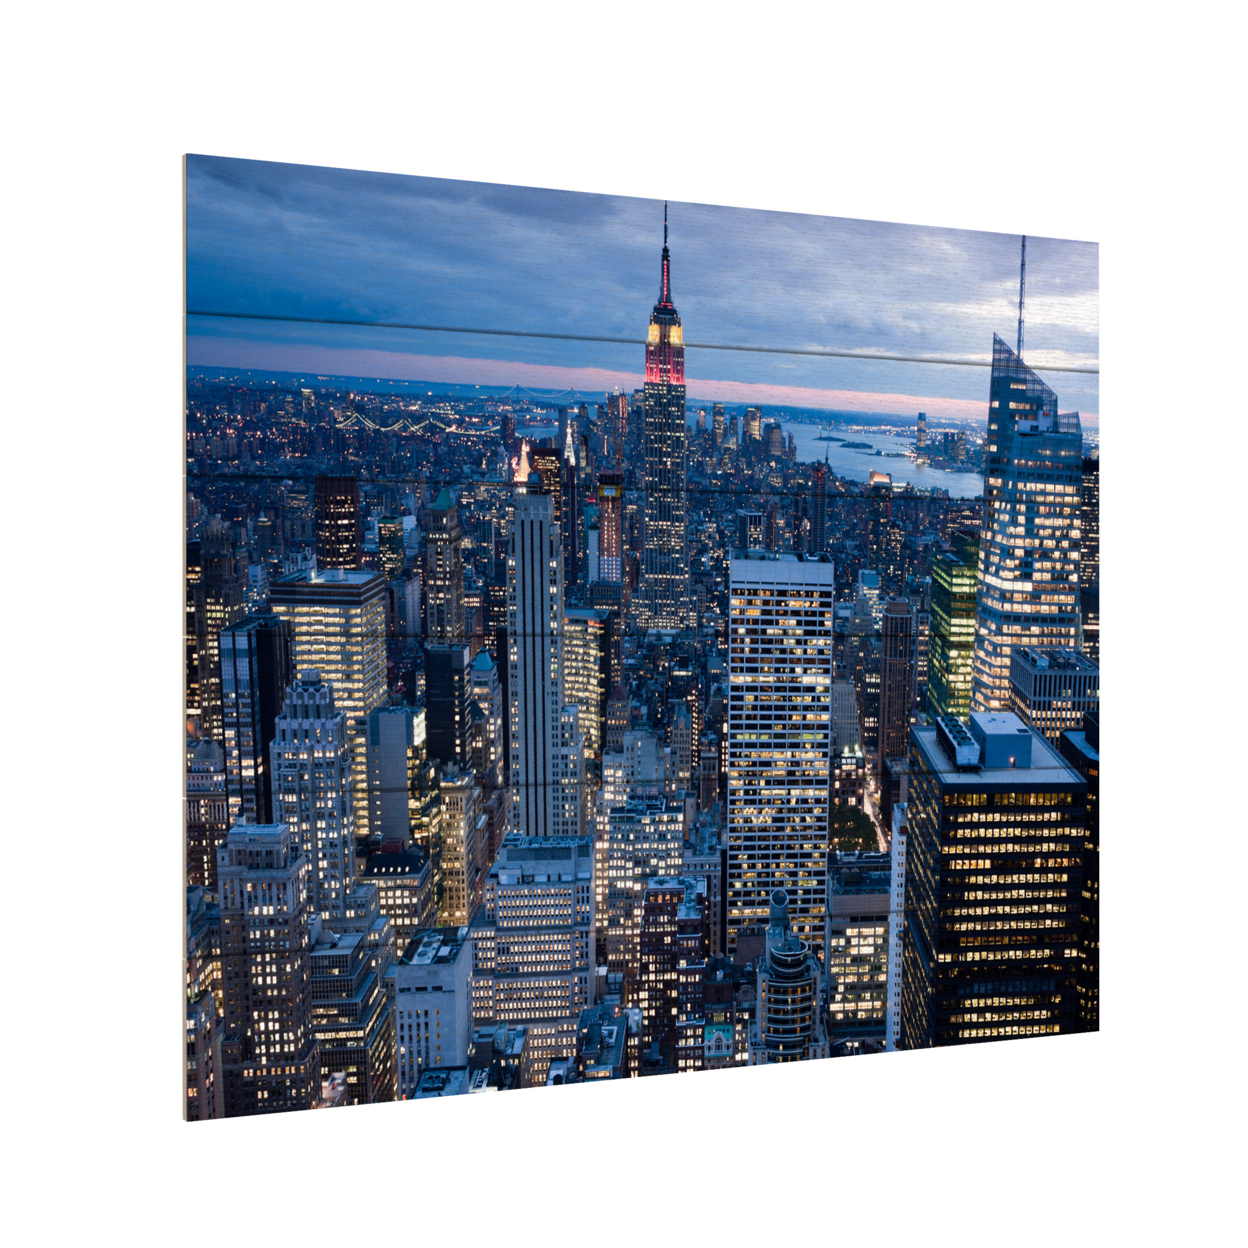 Wooden Slat Art 18 X 22 Inches Titled New York City, NY Ready To Hang Home Decor Picture